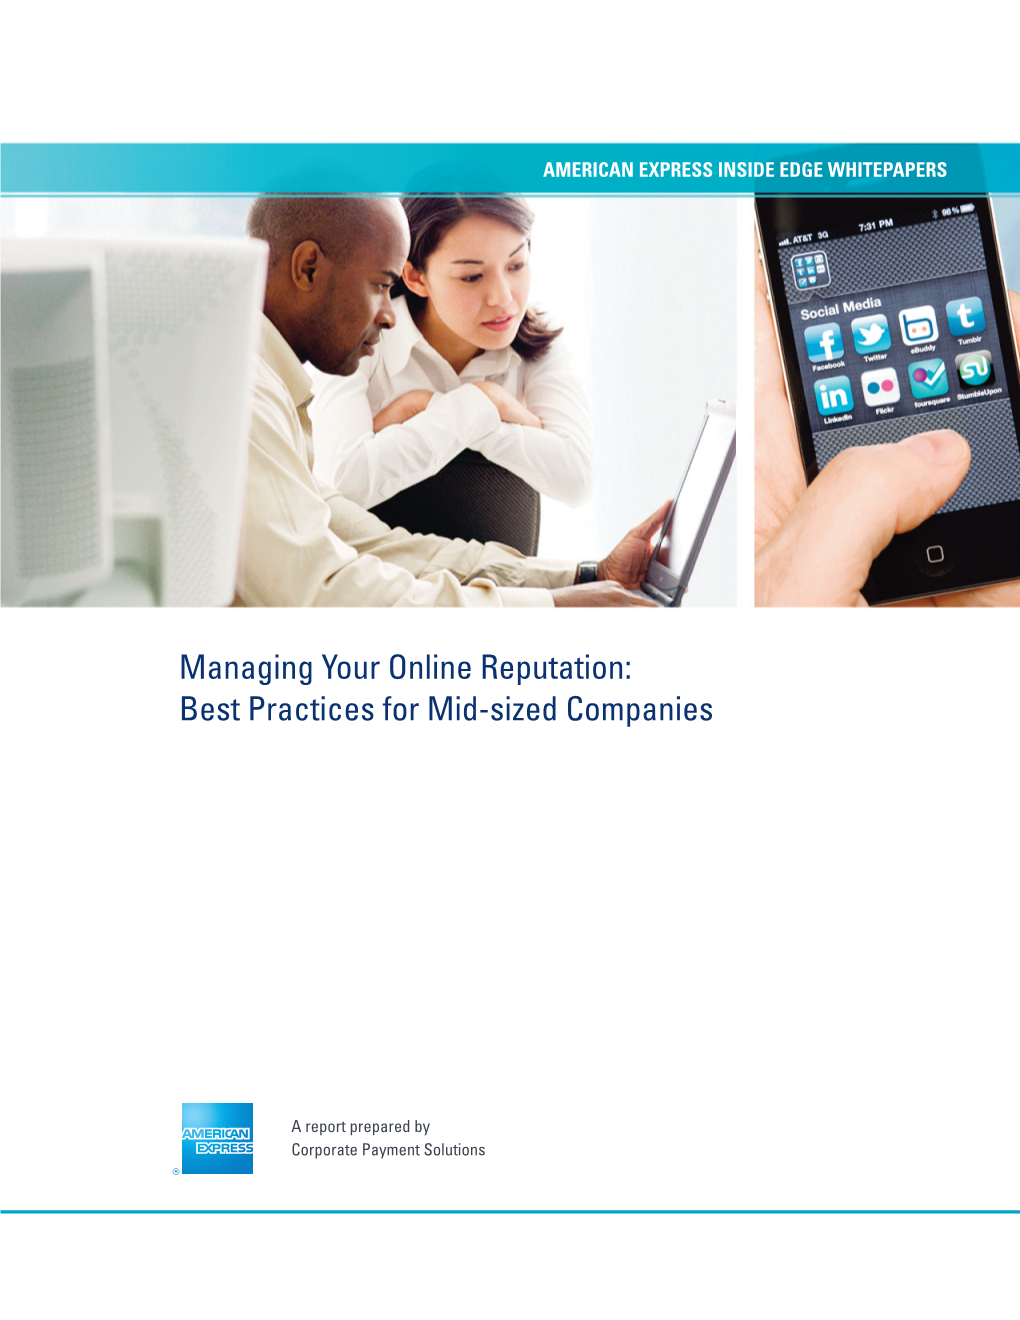 Managing Your Online Reputation: Best Practices for Mid-Sized Companies